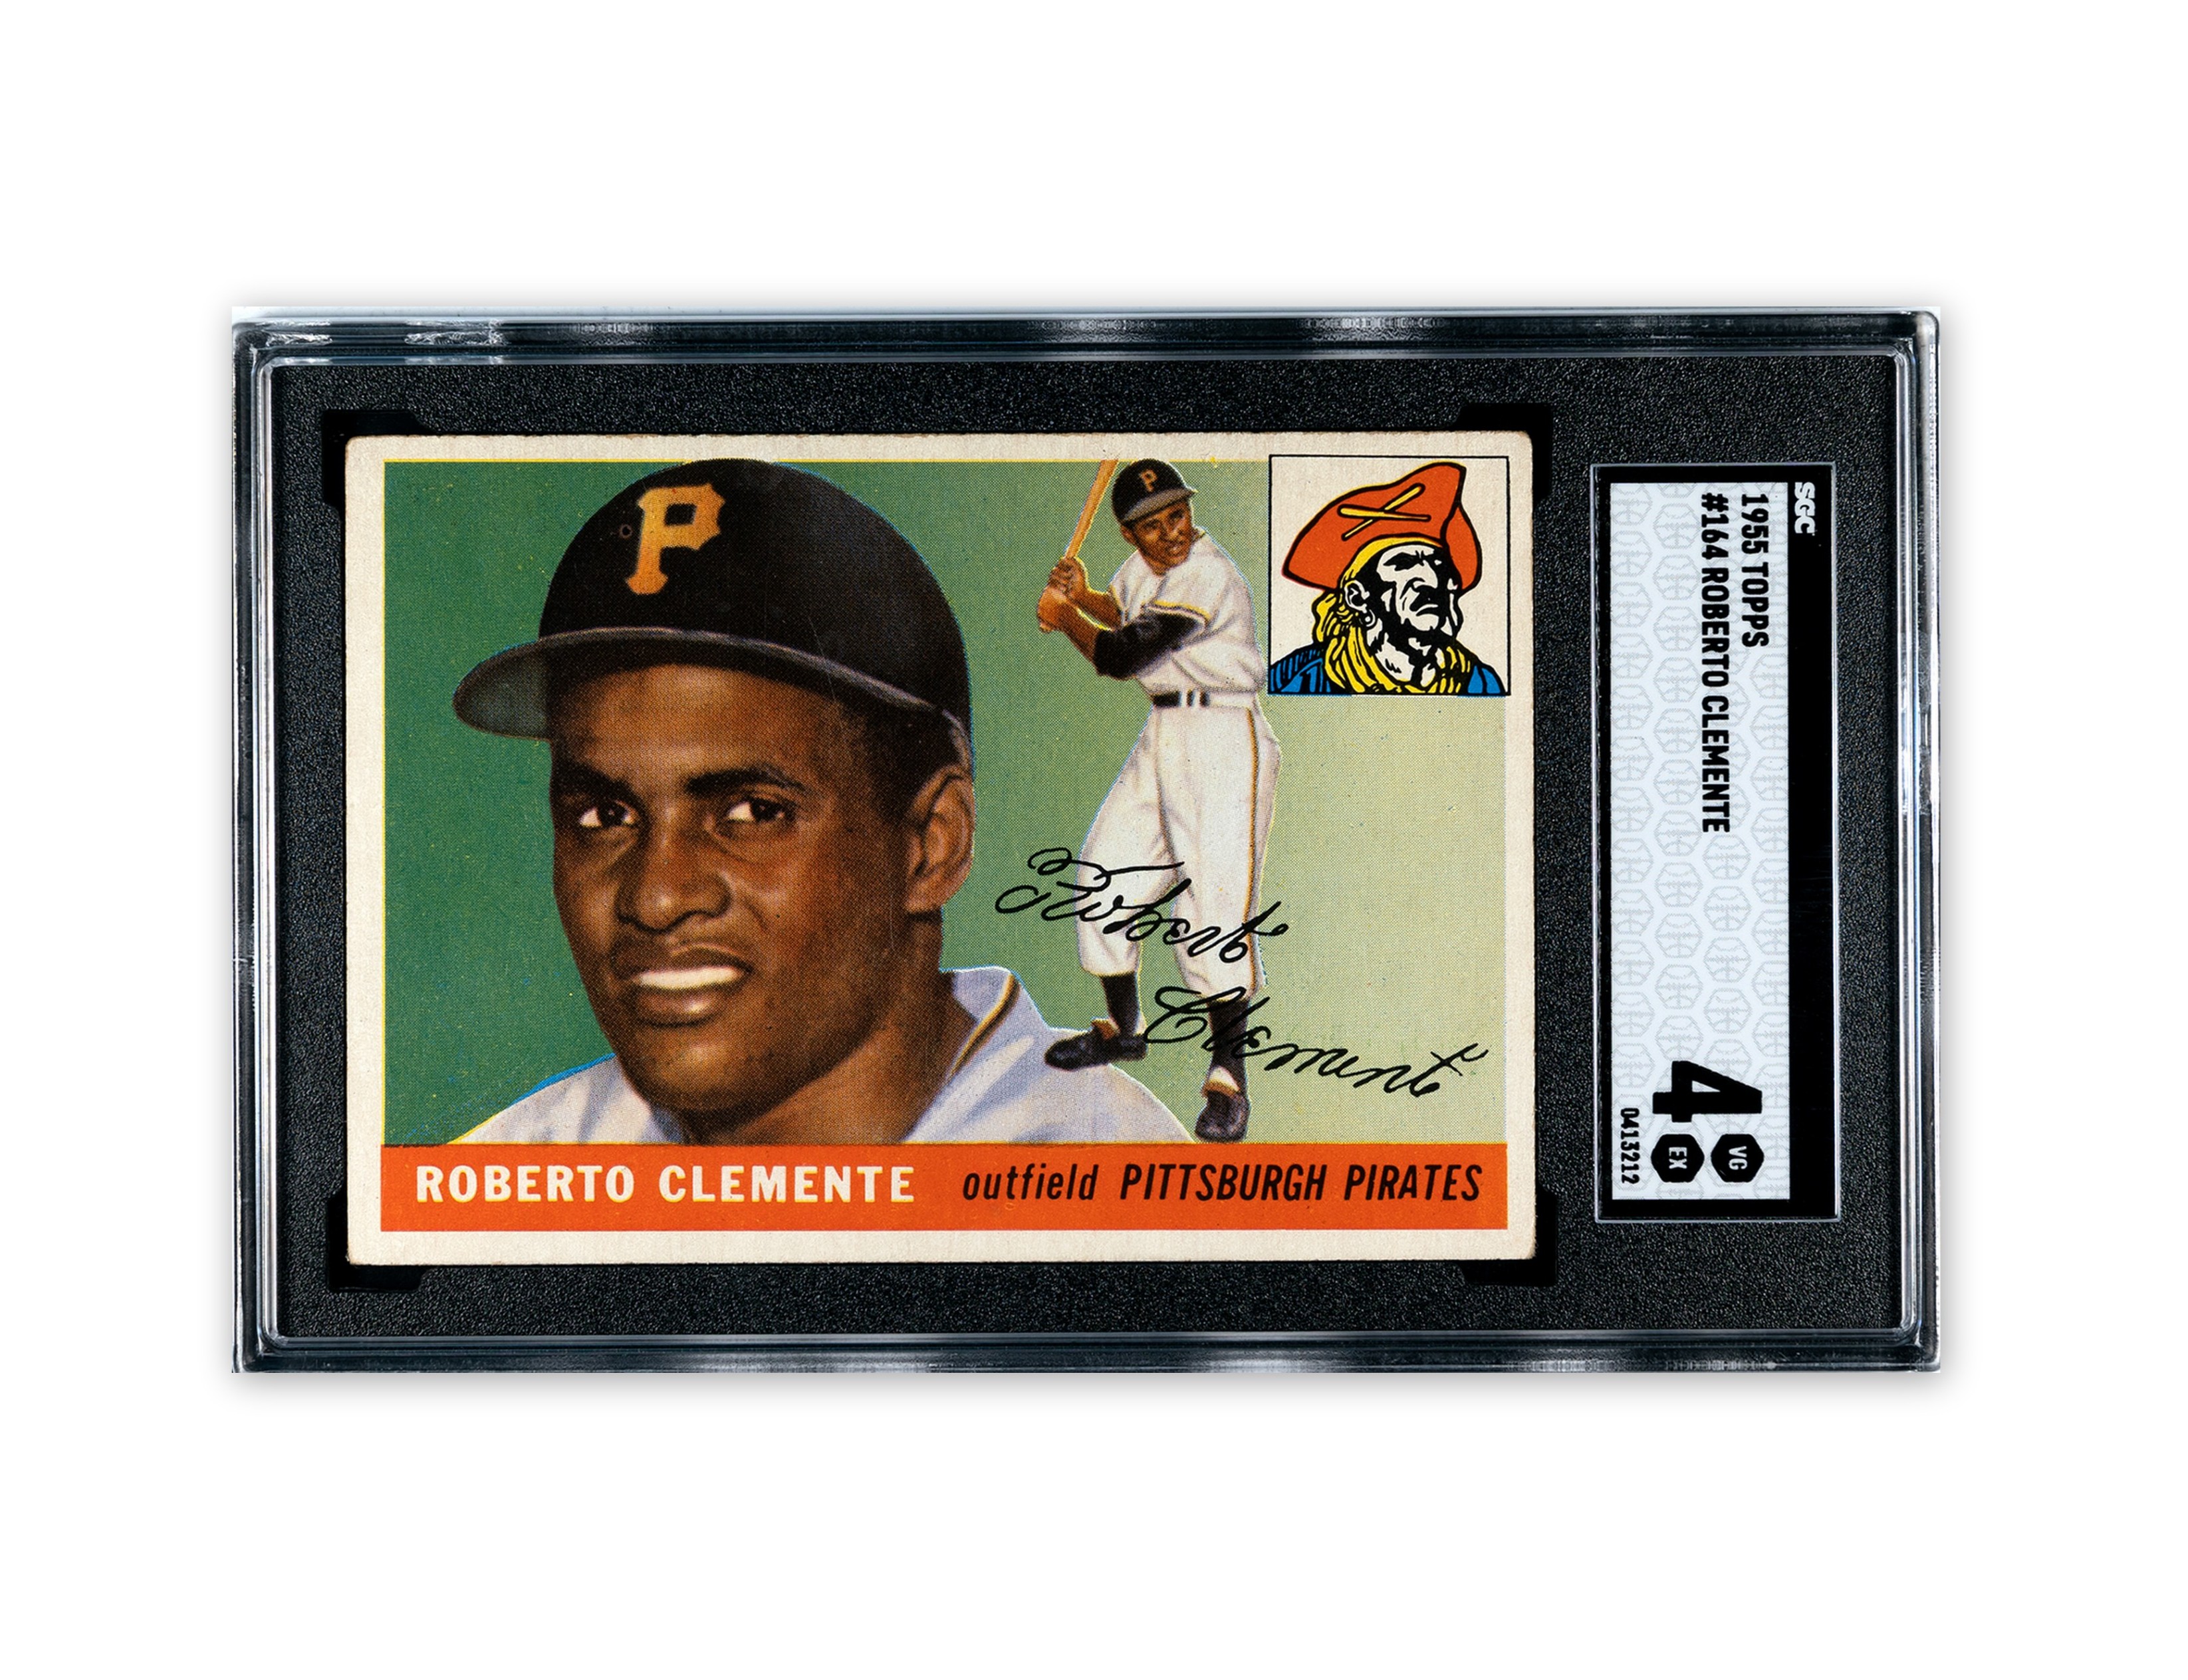 At Auction: Authentic Roberto Clemente 16 x 20 Artist 1st